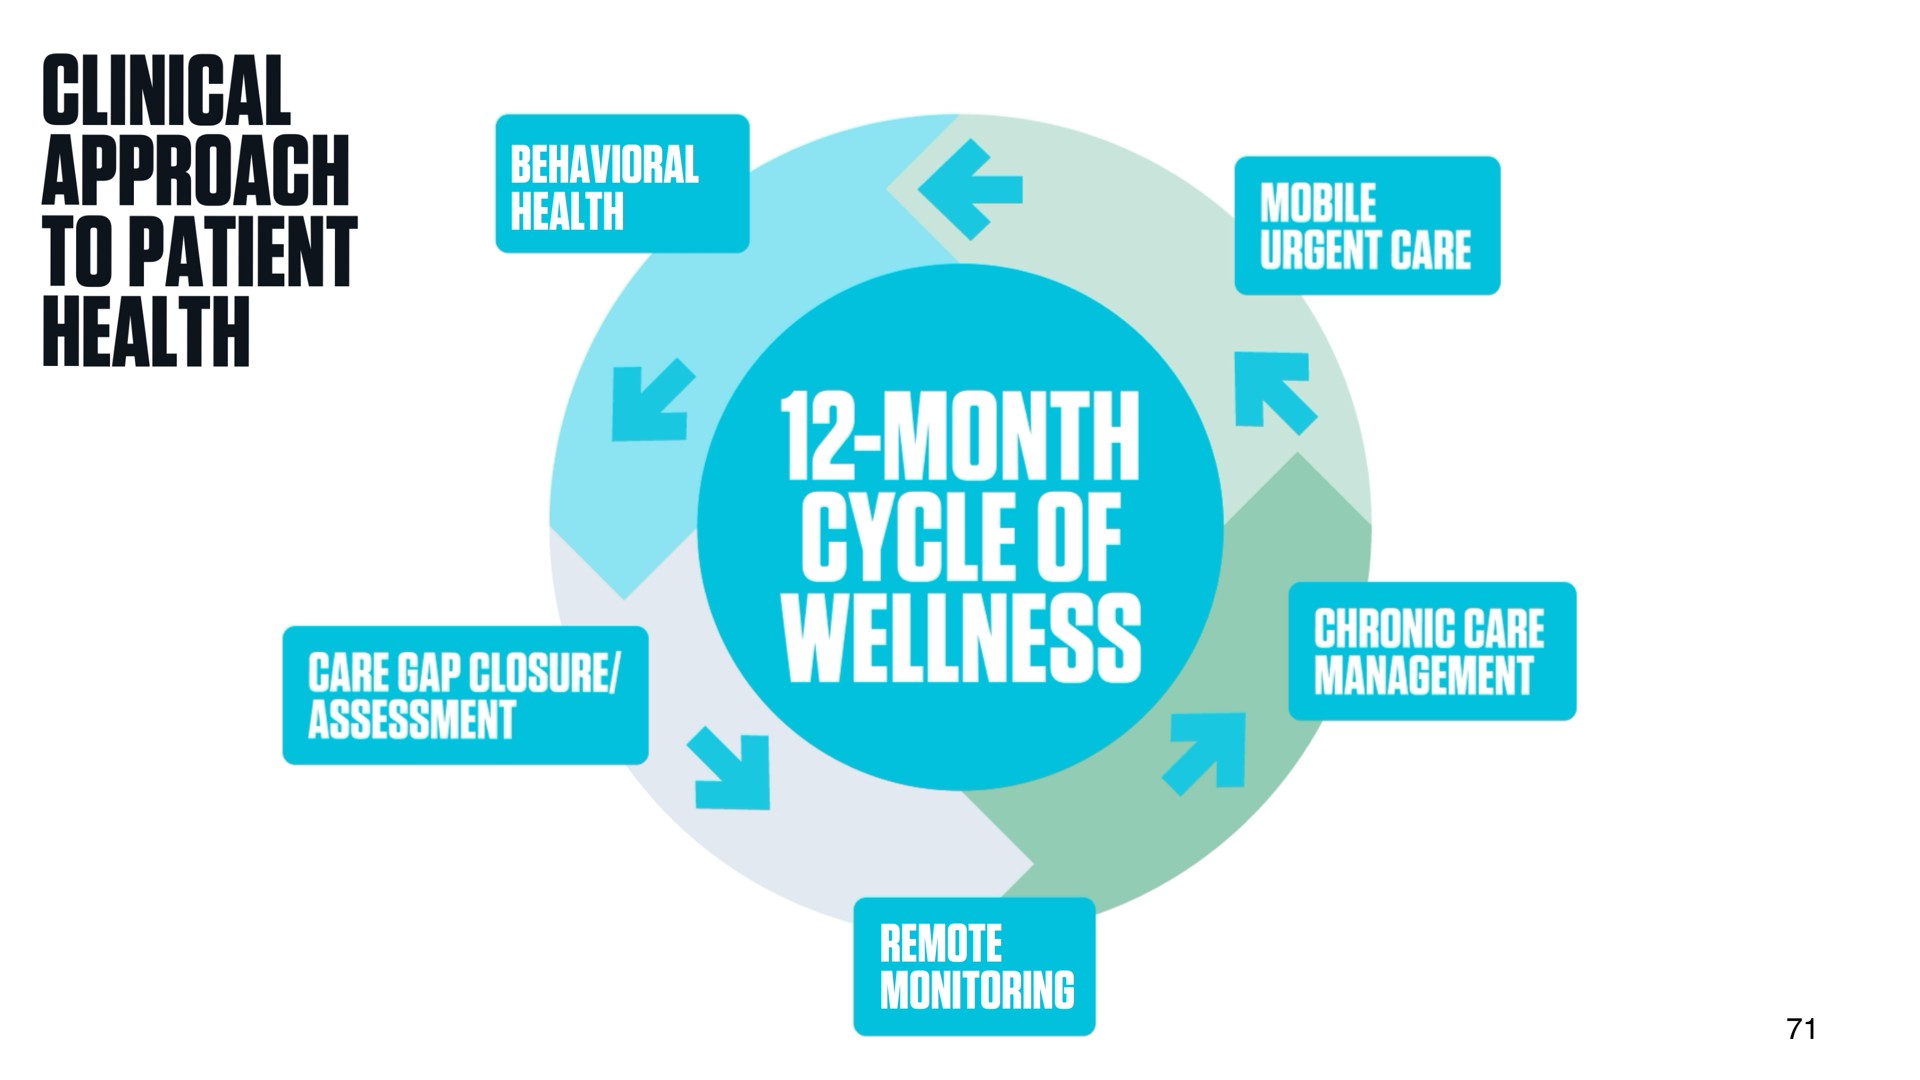 tas to patient health cycle of a pester chronic gare a | DocGo